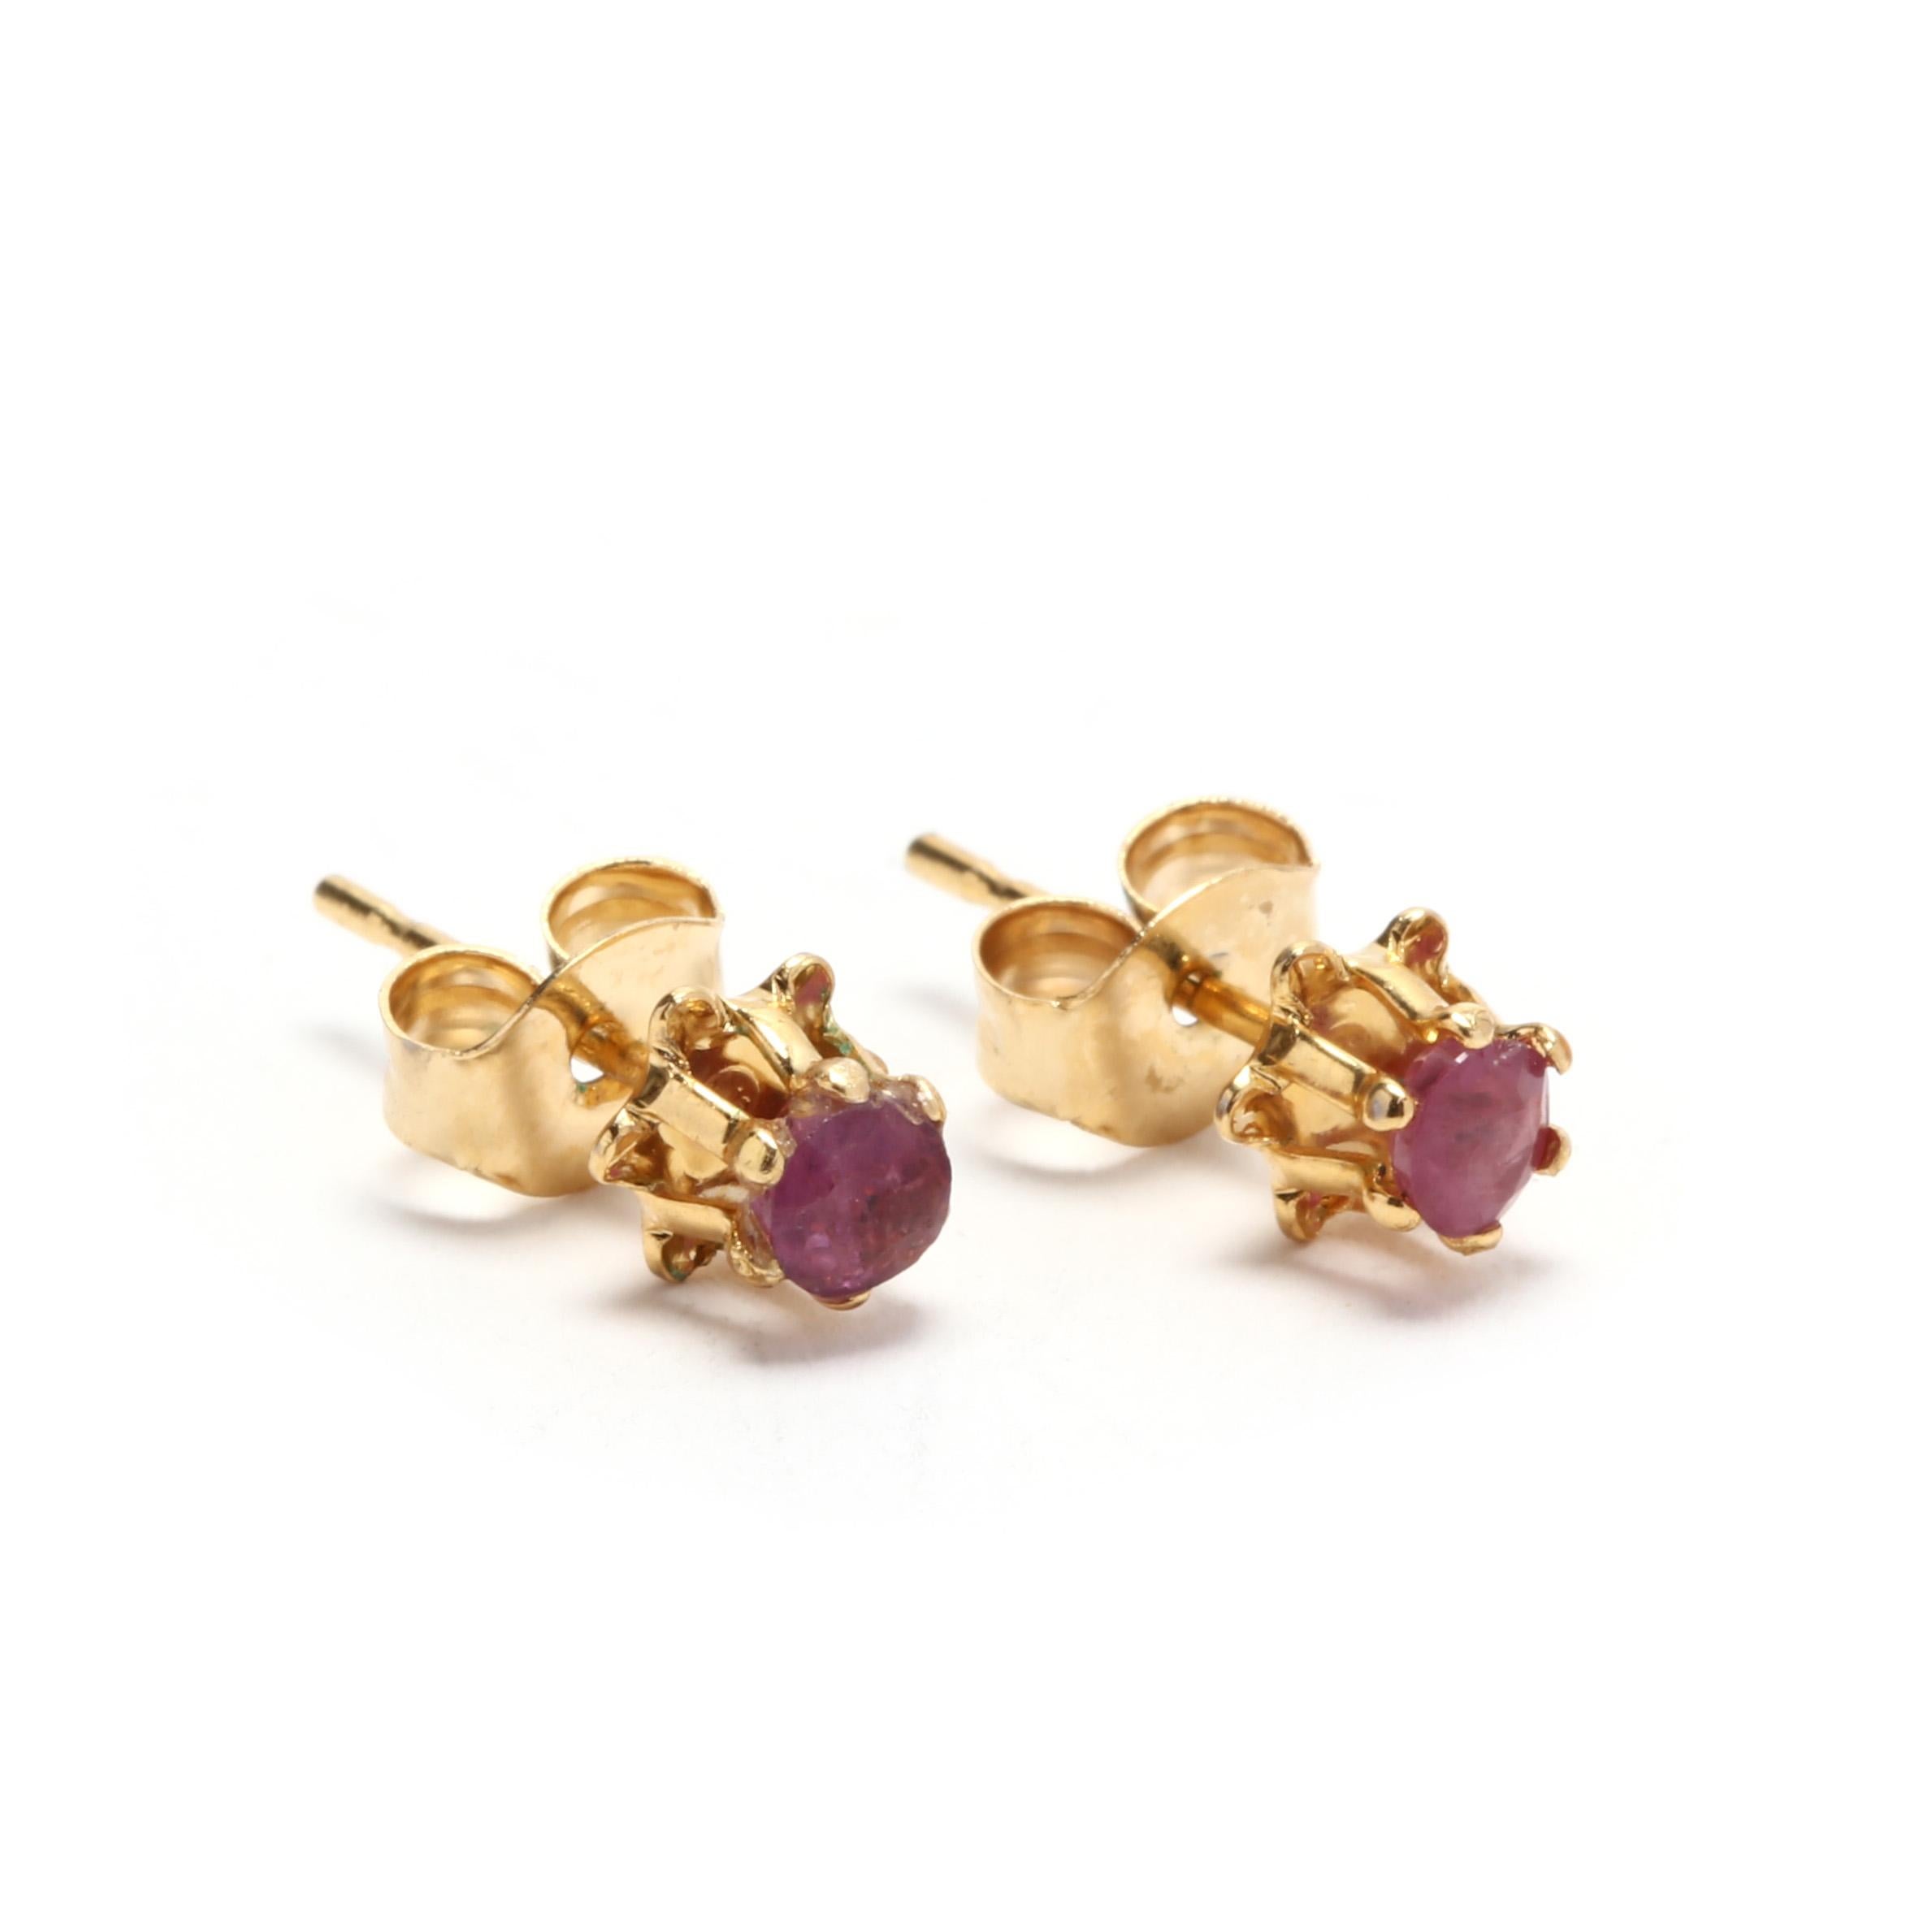 Round Cut 14 Karat Yellow Gold and Ruby Flower Stud Earrings